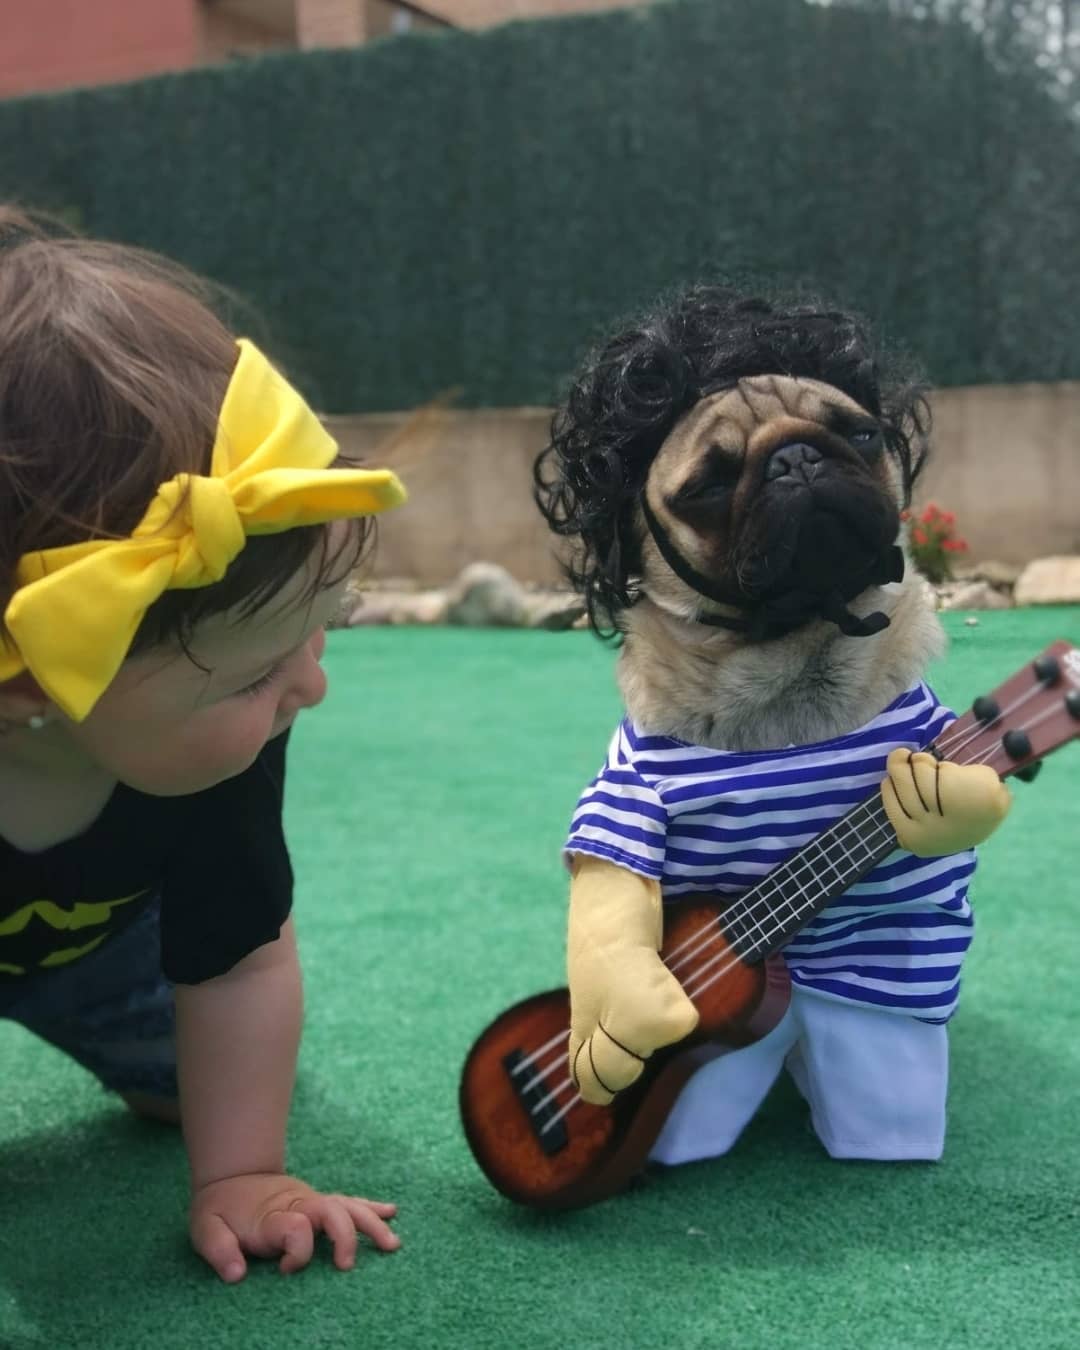 A Pug in a musician costume while a baby girl is crawling next to him